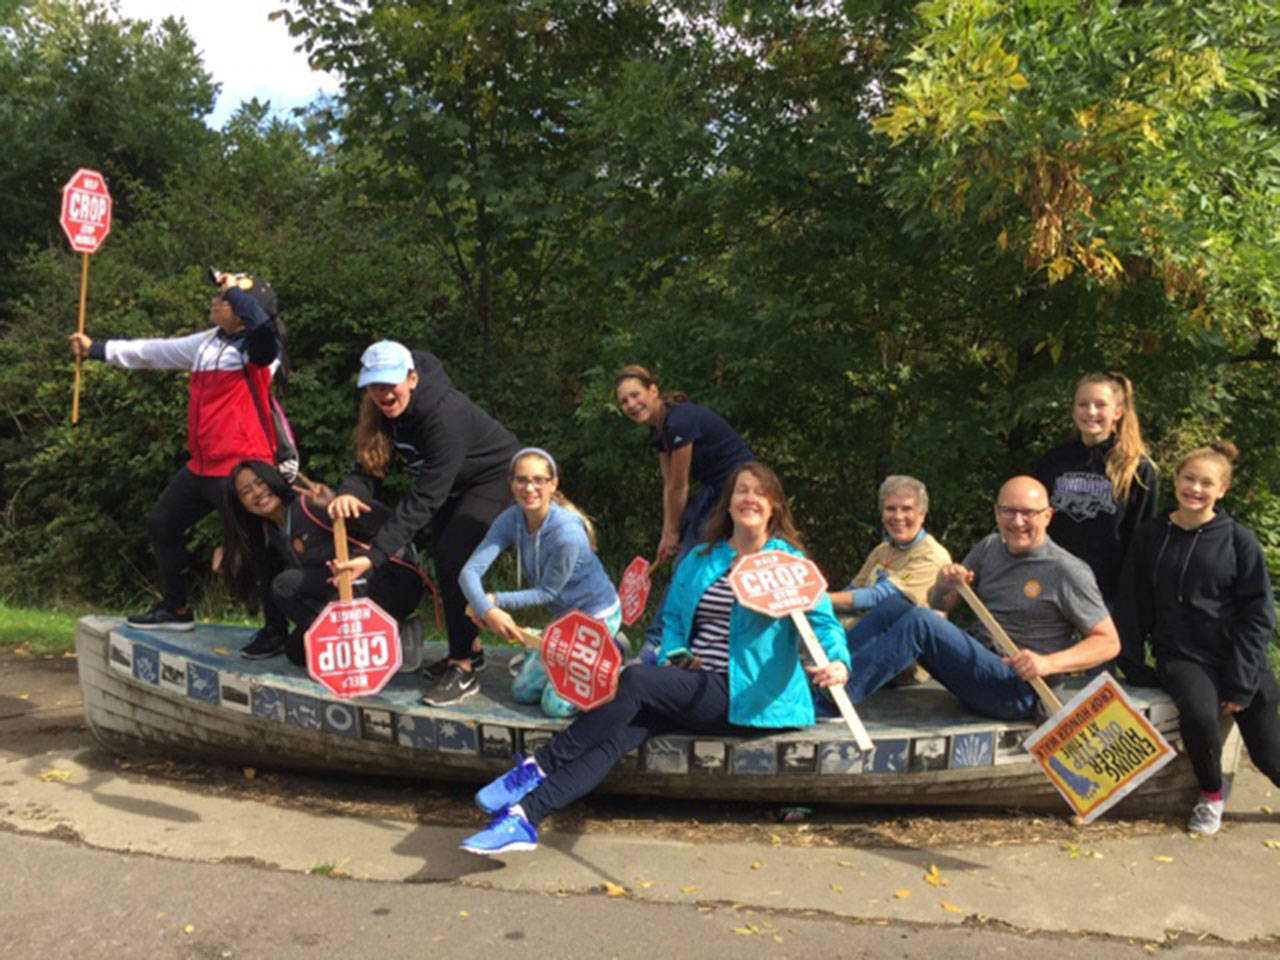 A group participating in the 25th annual Dr. Dave Turner Memorial Kent CROP Hunger Walk stops by to occupy a canoe along the Green River Trail. COURTESY PHOTO